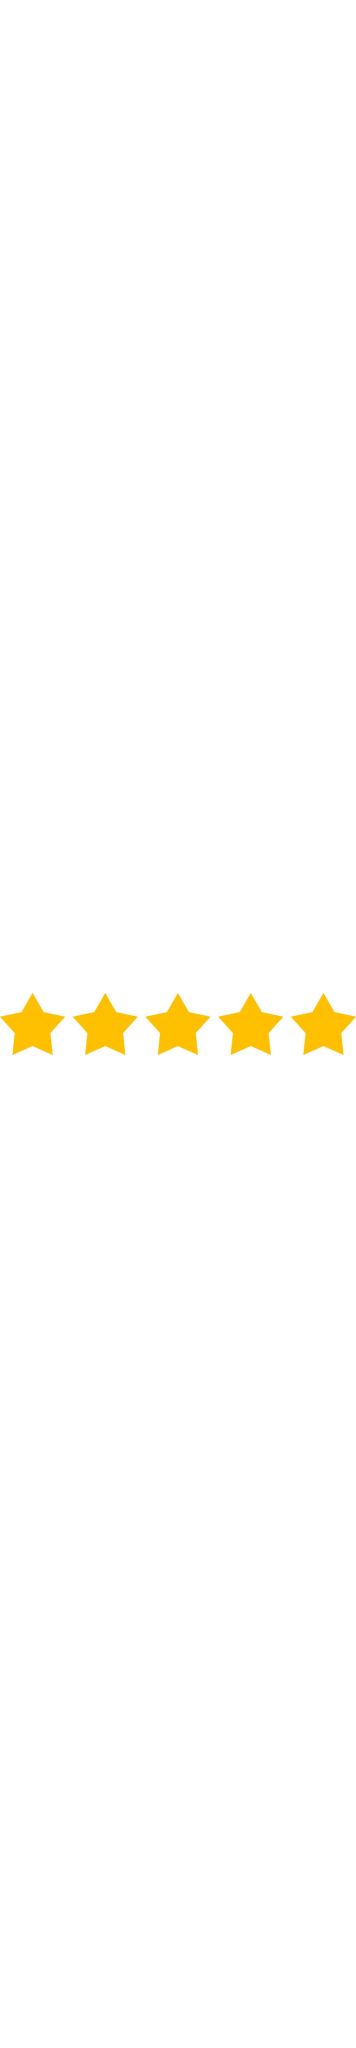 5 Gold Stars in a line